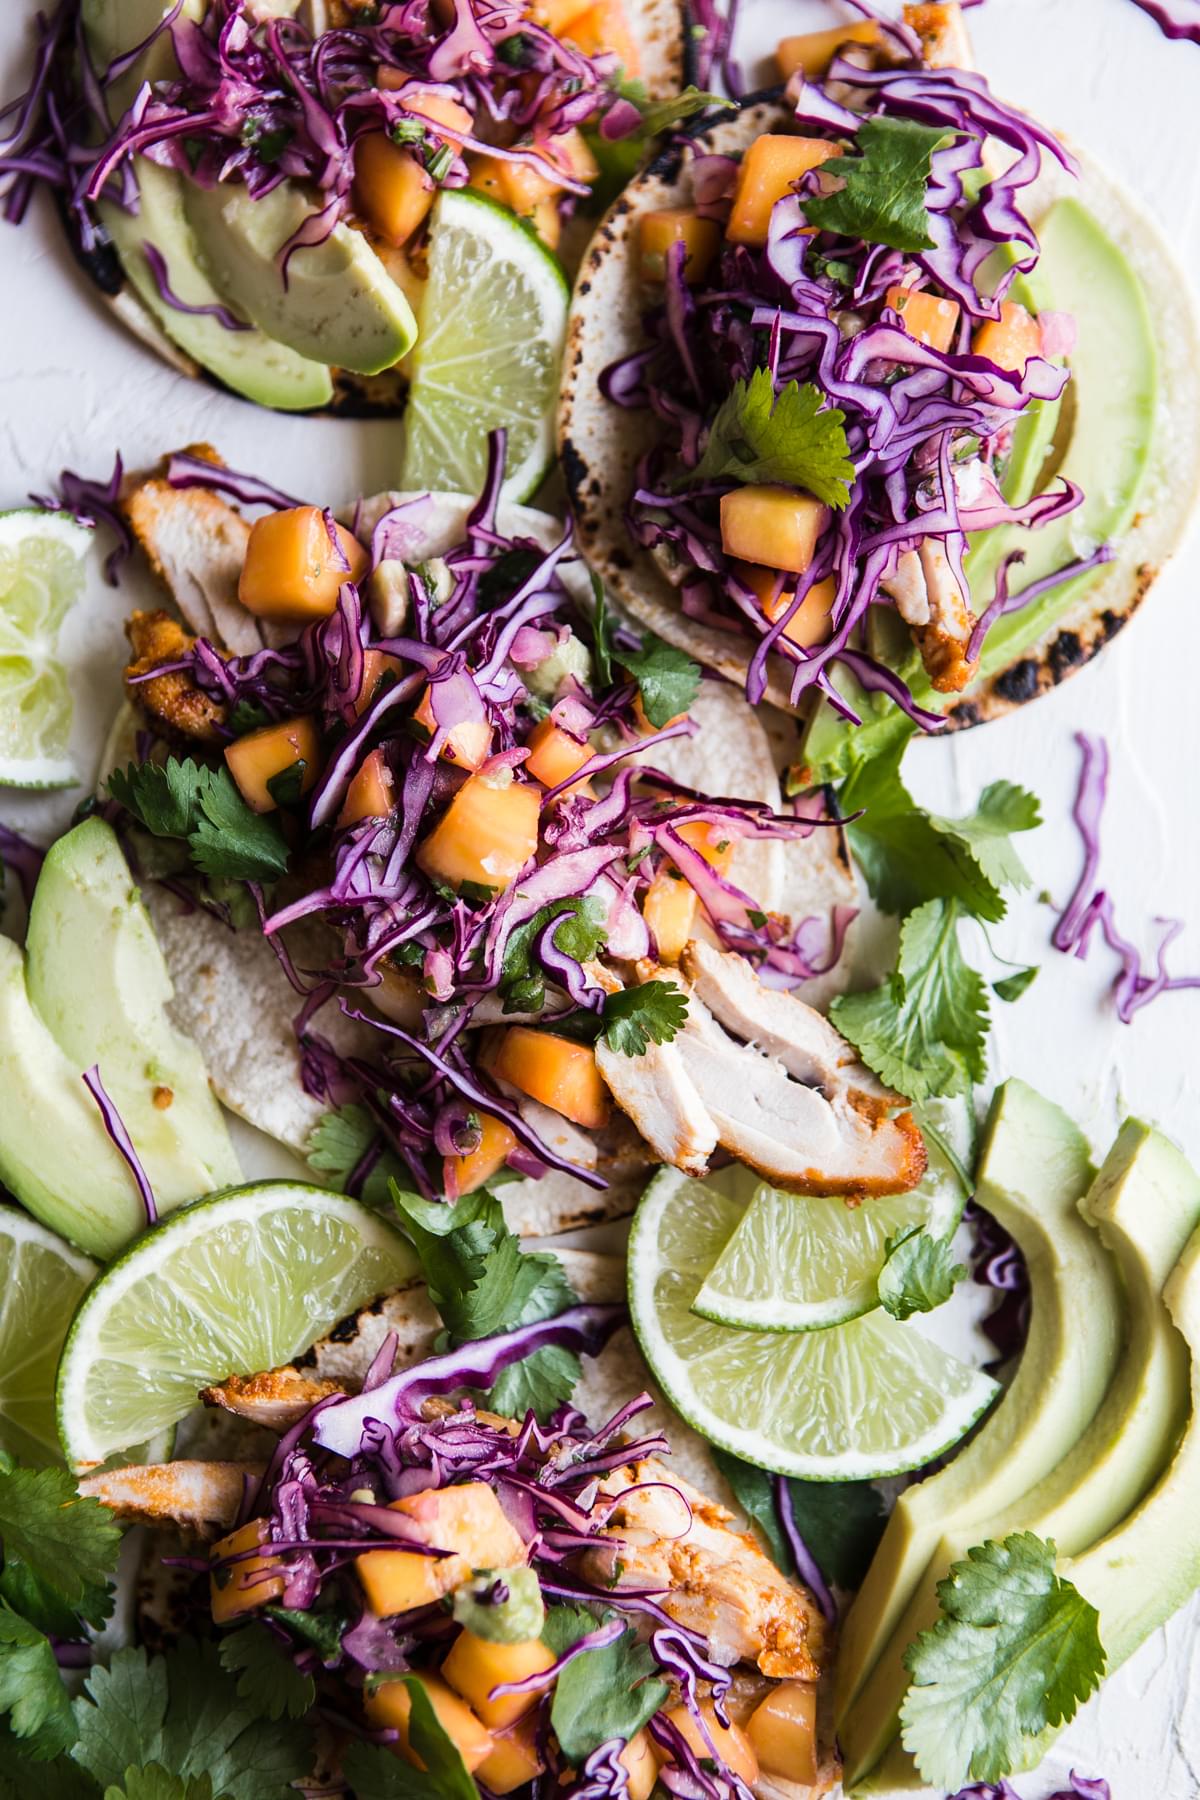 Chicken street tacos with mango slaw, avocado and lime